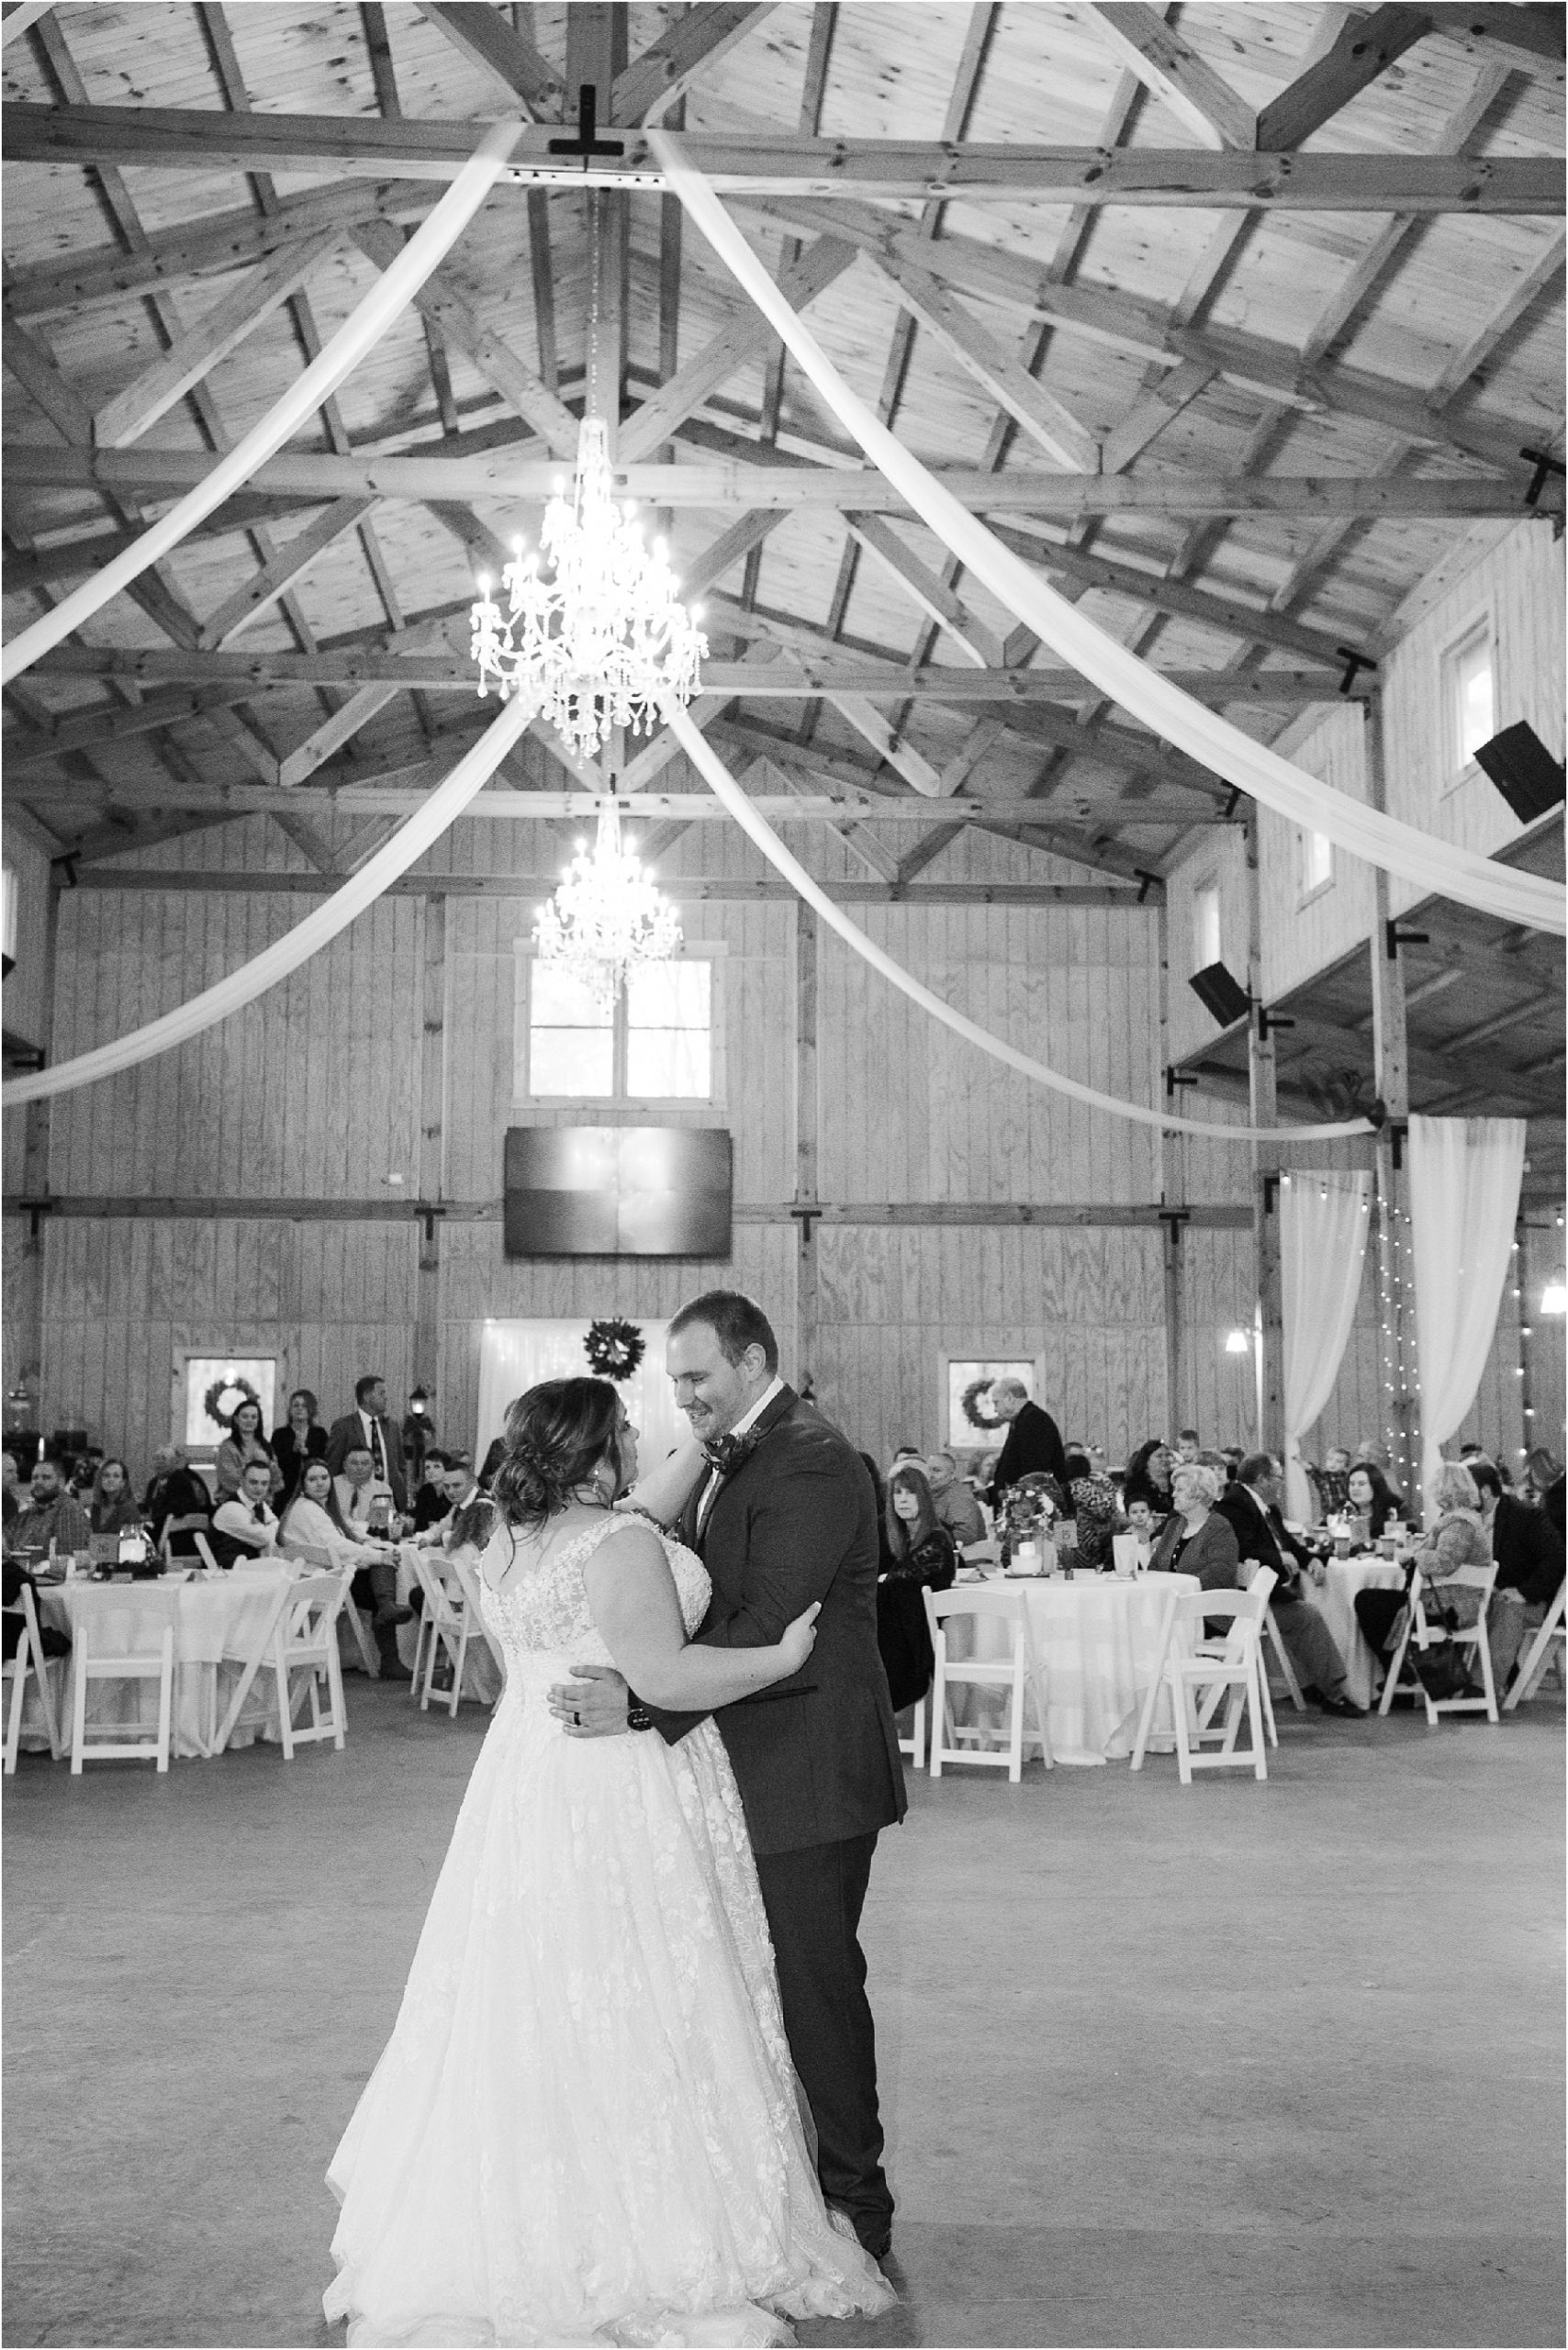 newlyweds dance in front of guests at a barn venue